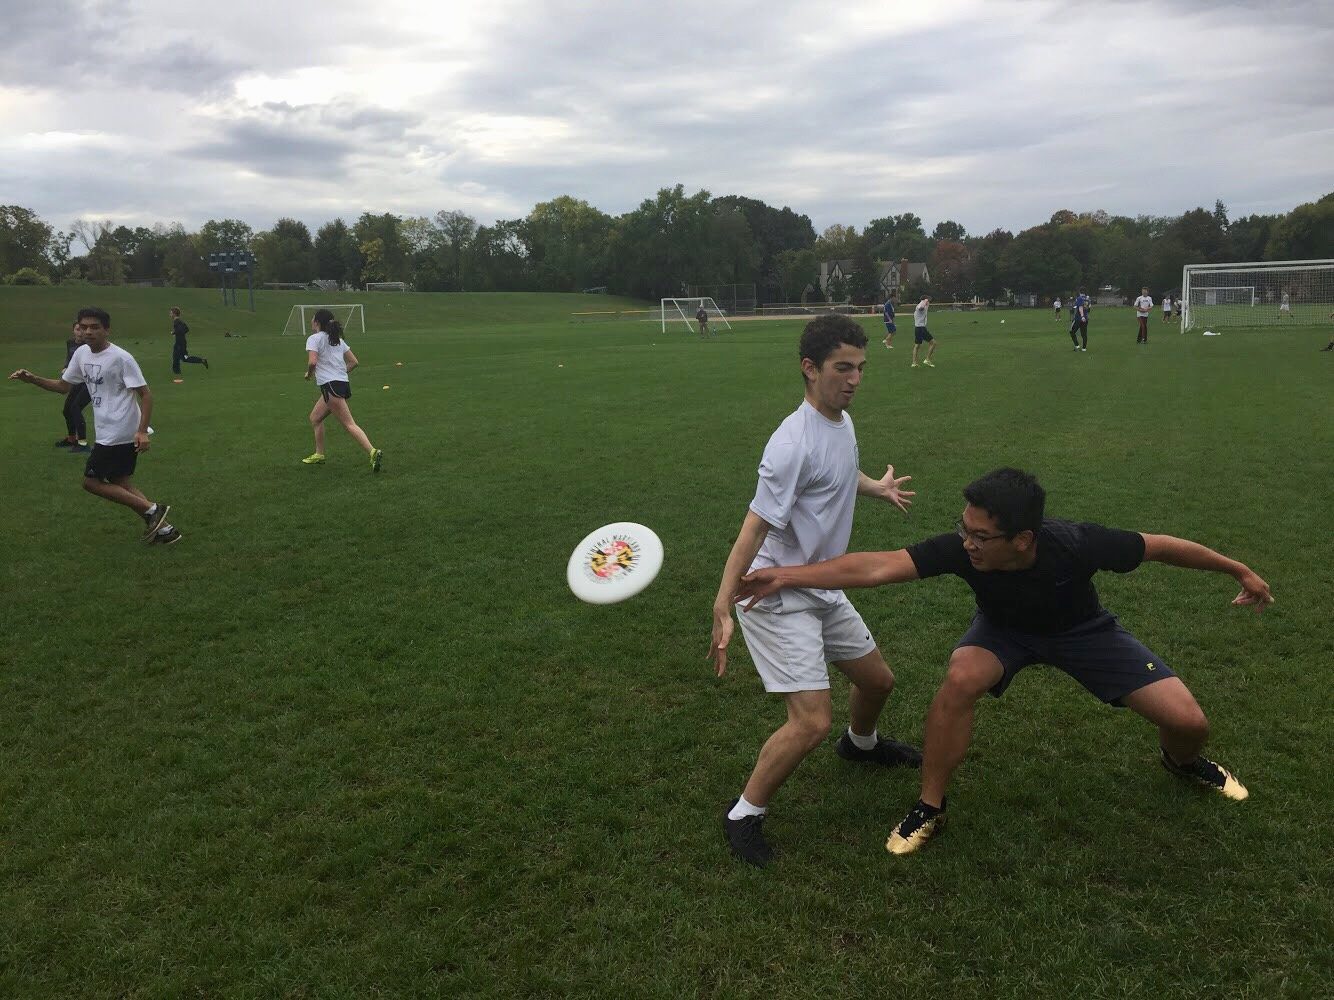 12-facts-about-ultimate-frisbee-tournament